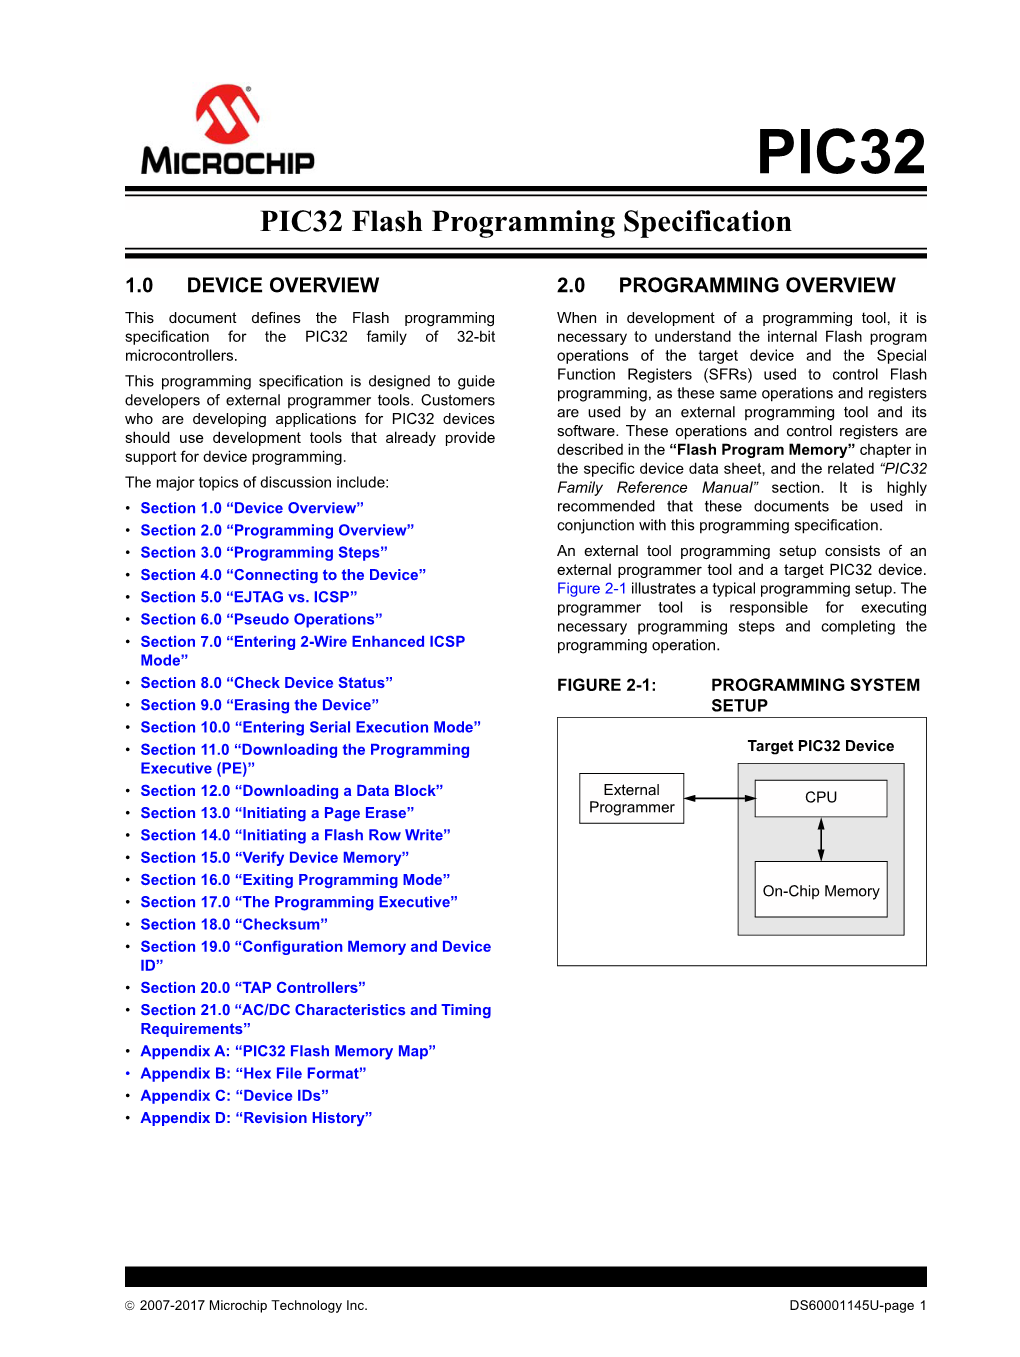 PIC32 Flash Programming Specification